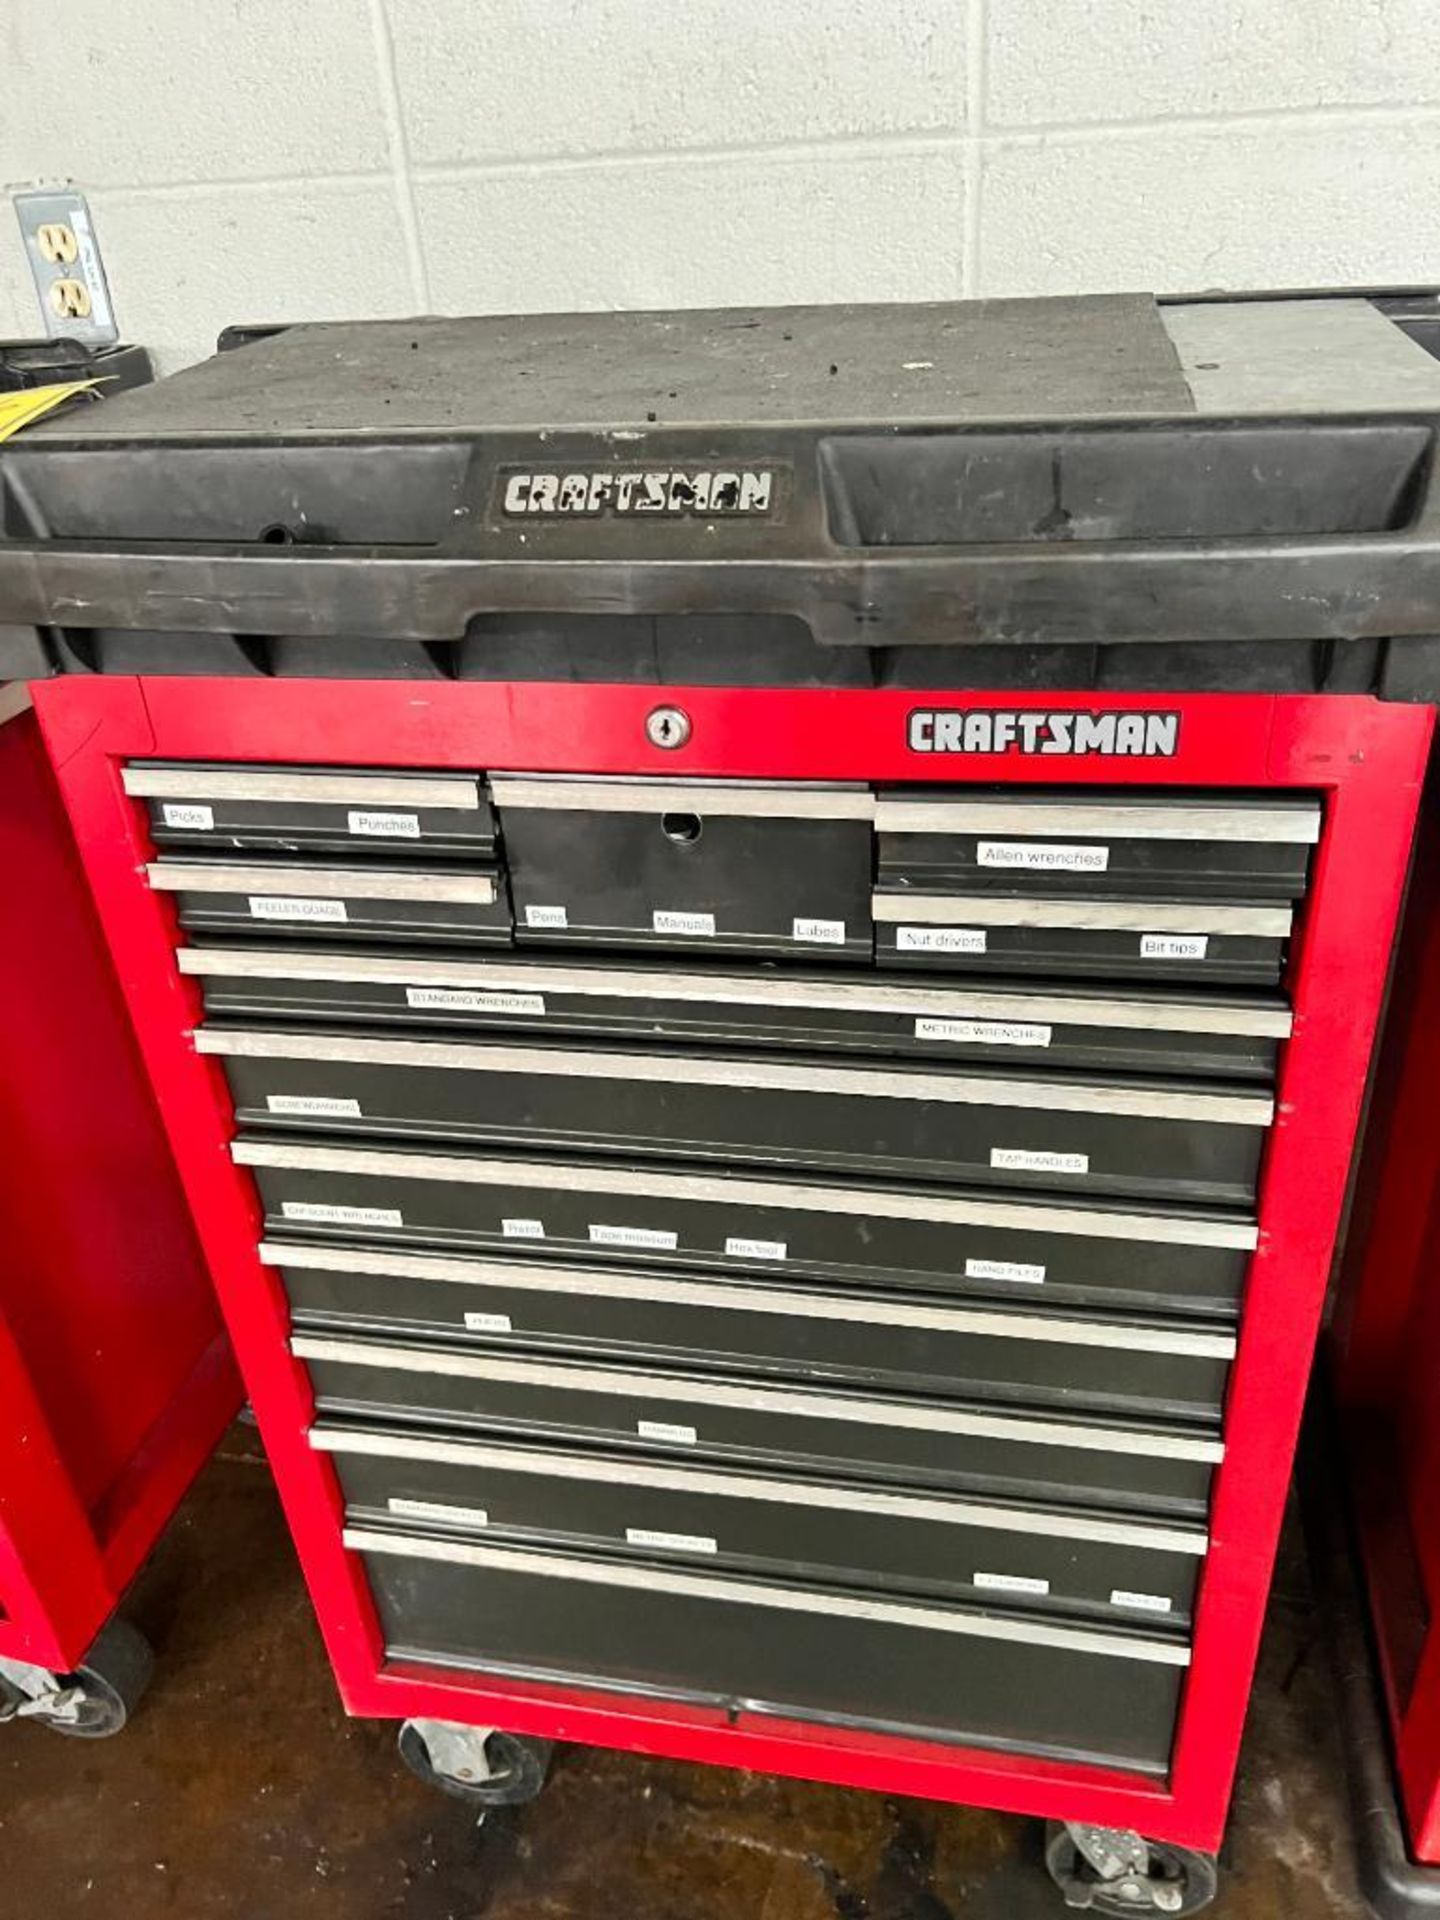 Craftsman 12-Drawer Rolling Toolbox w/ Content of Assorted Tools